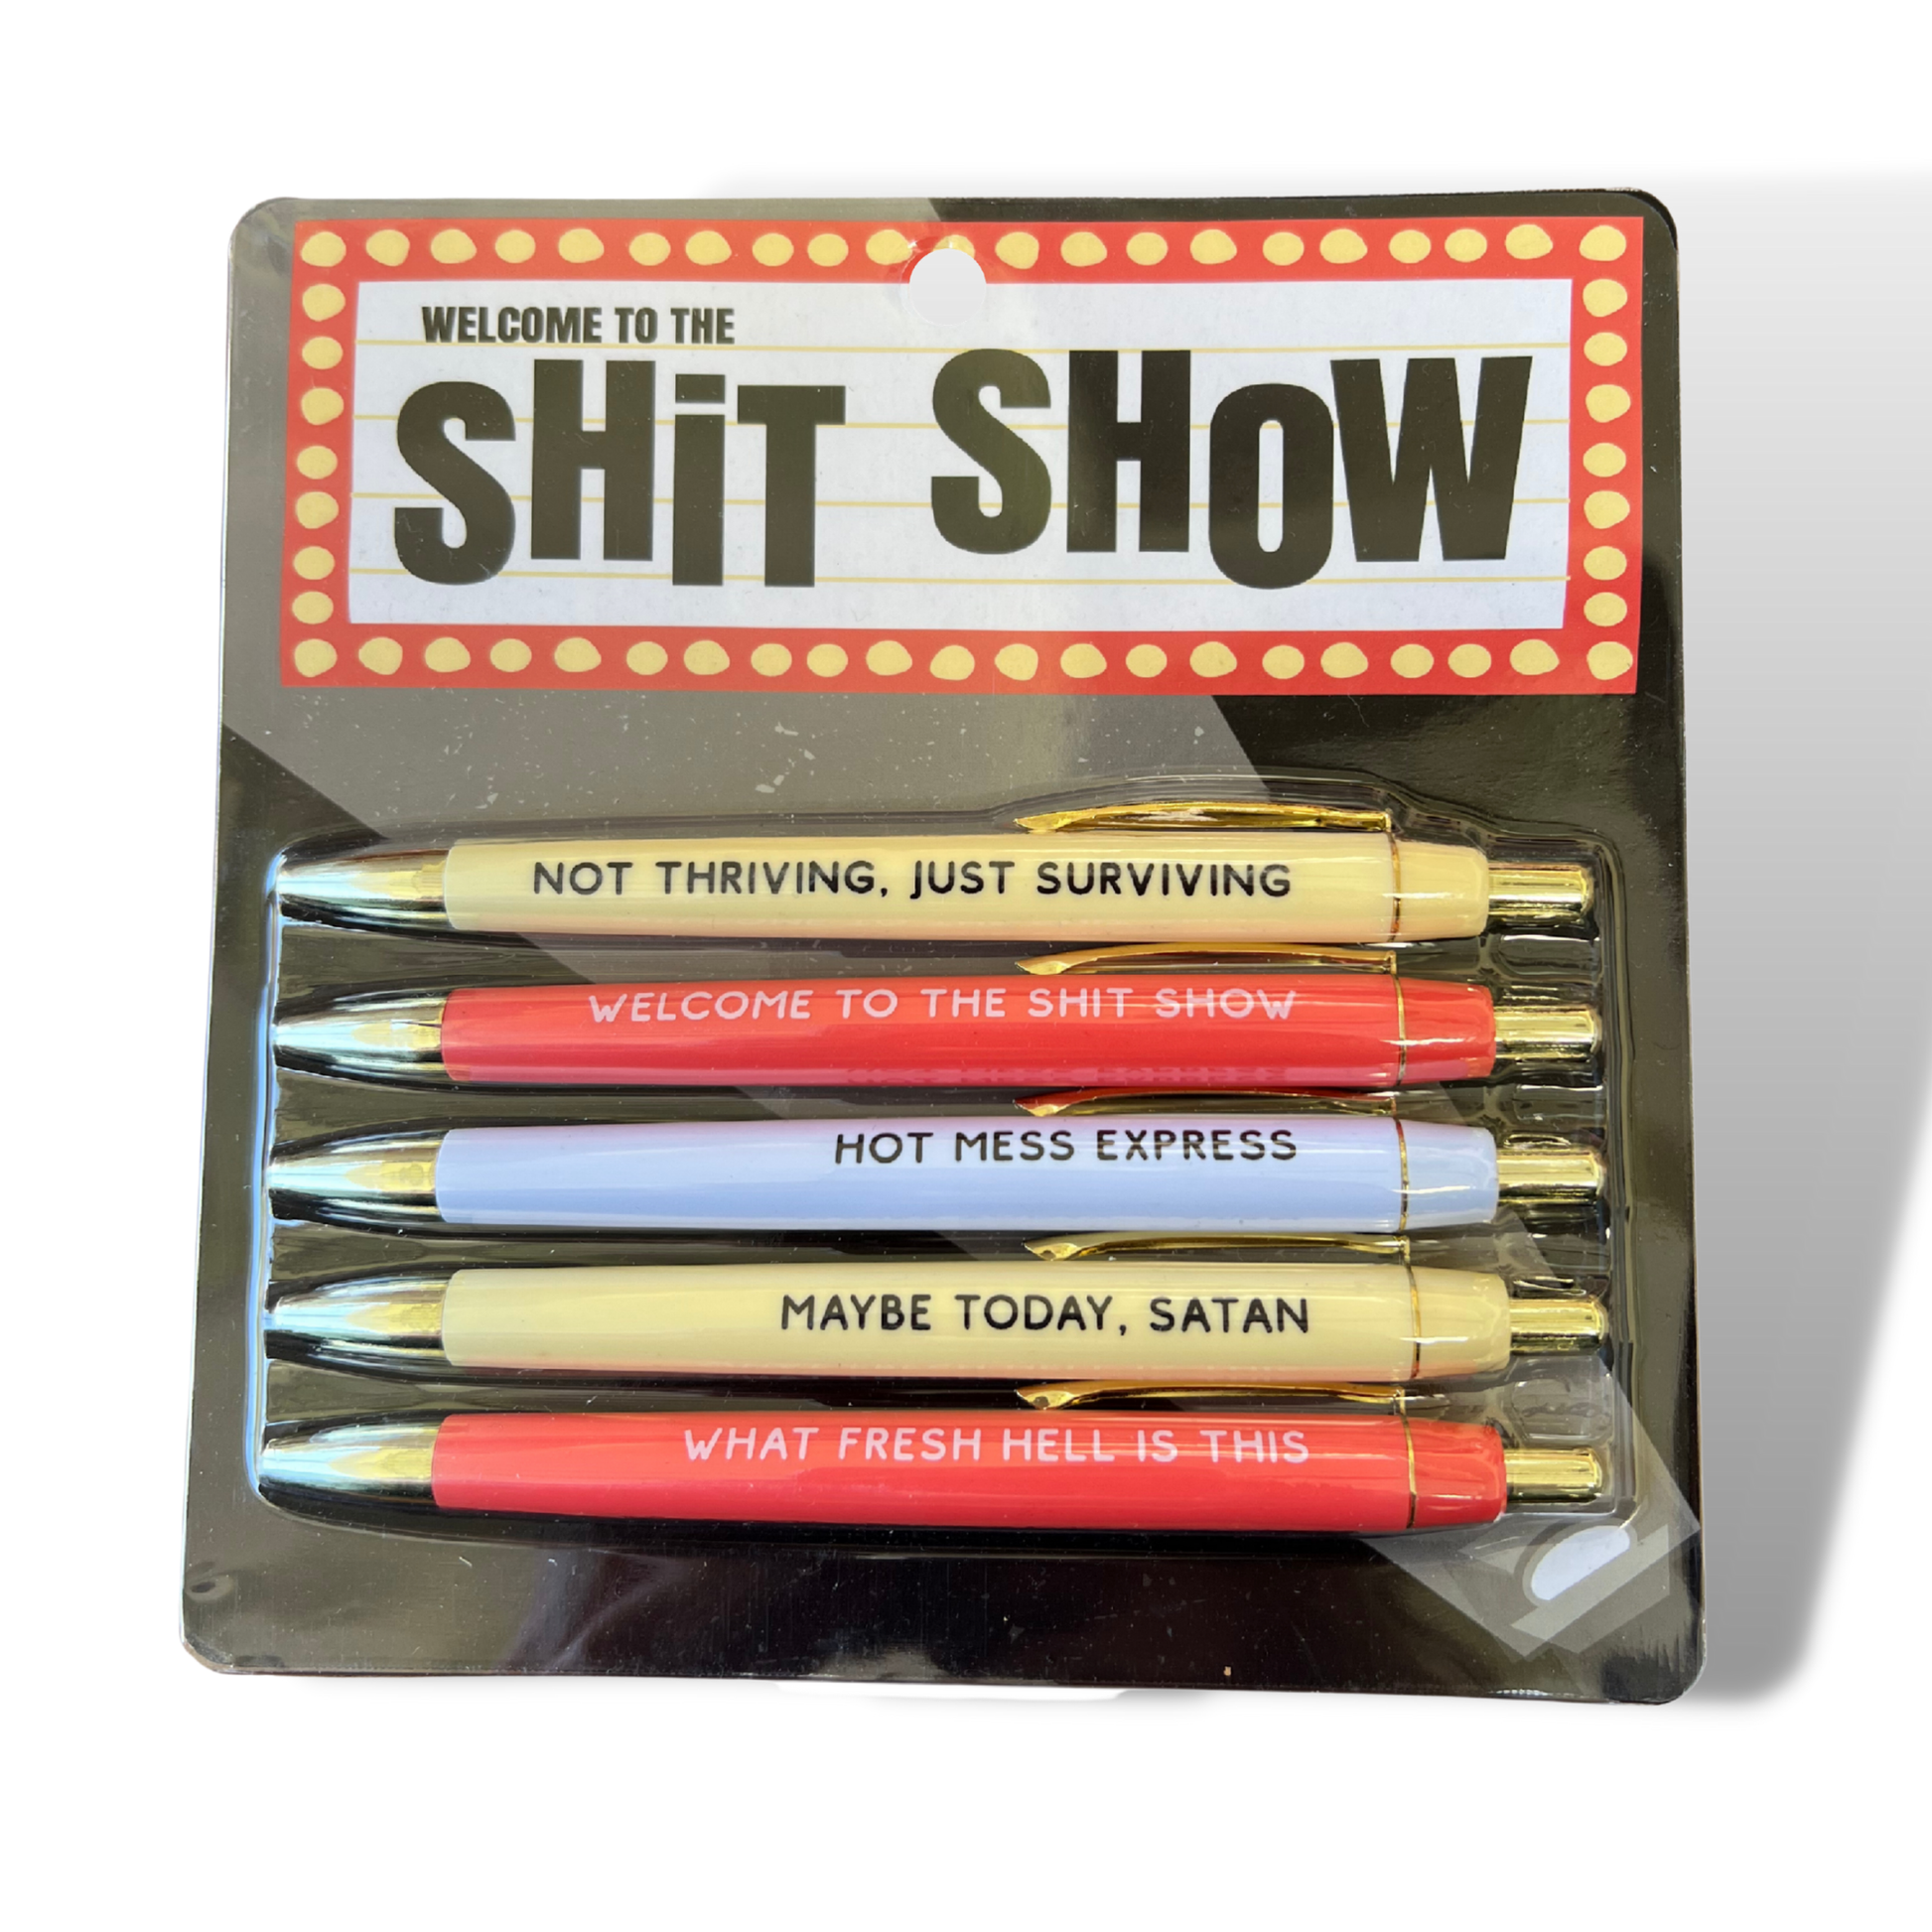  Funny Snarky Offensive Pens, a gag gift : Office Products